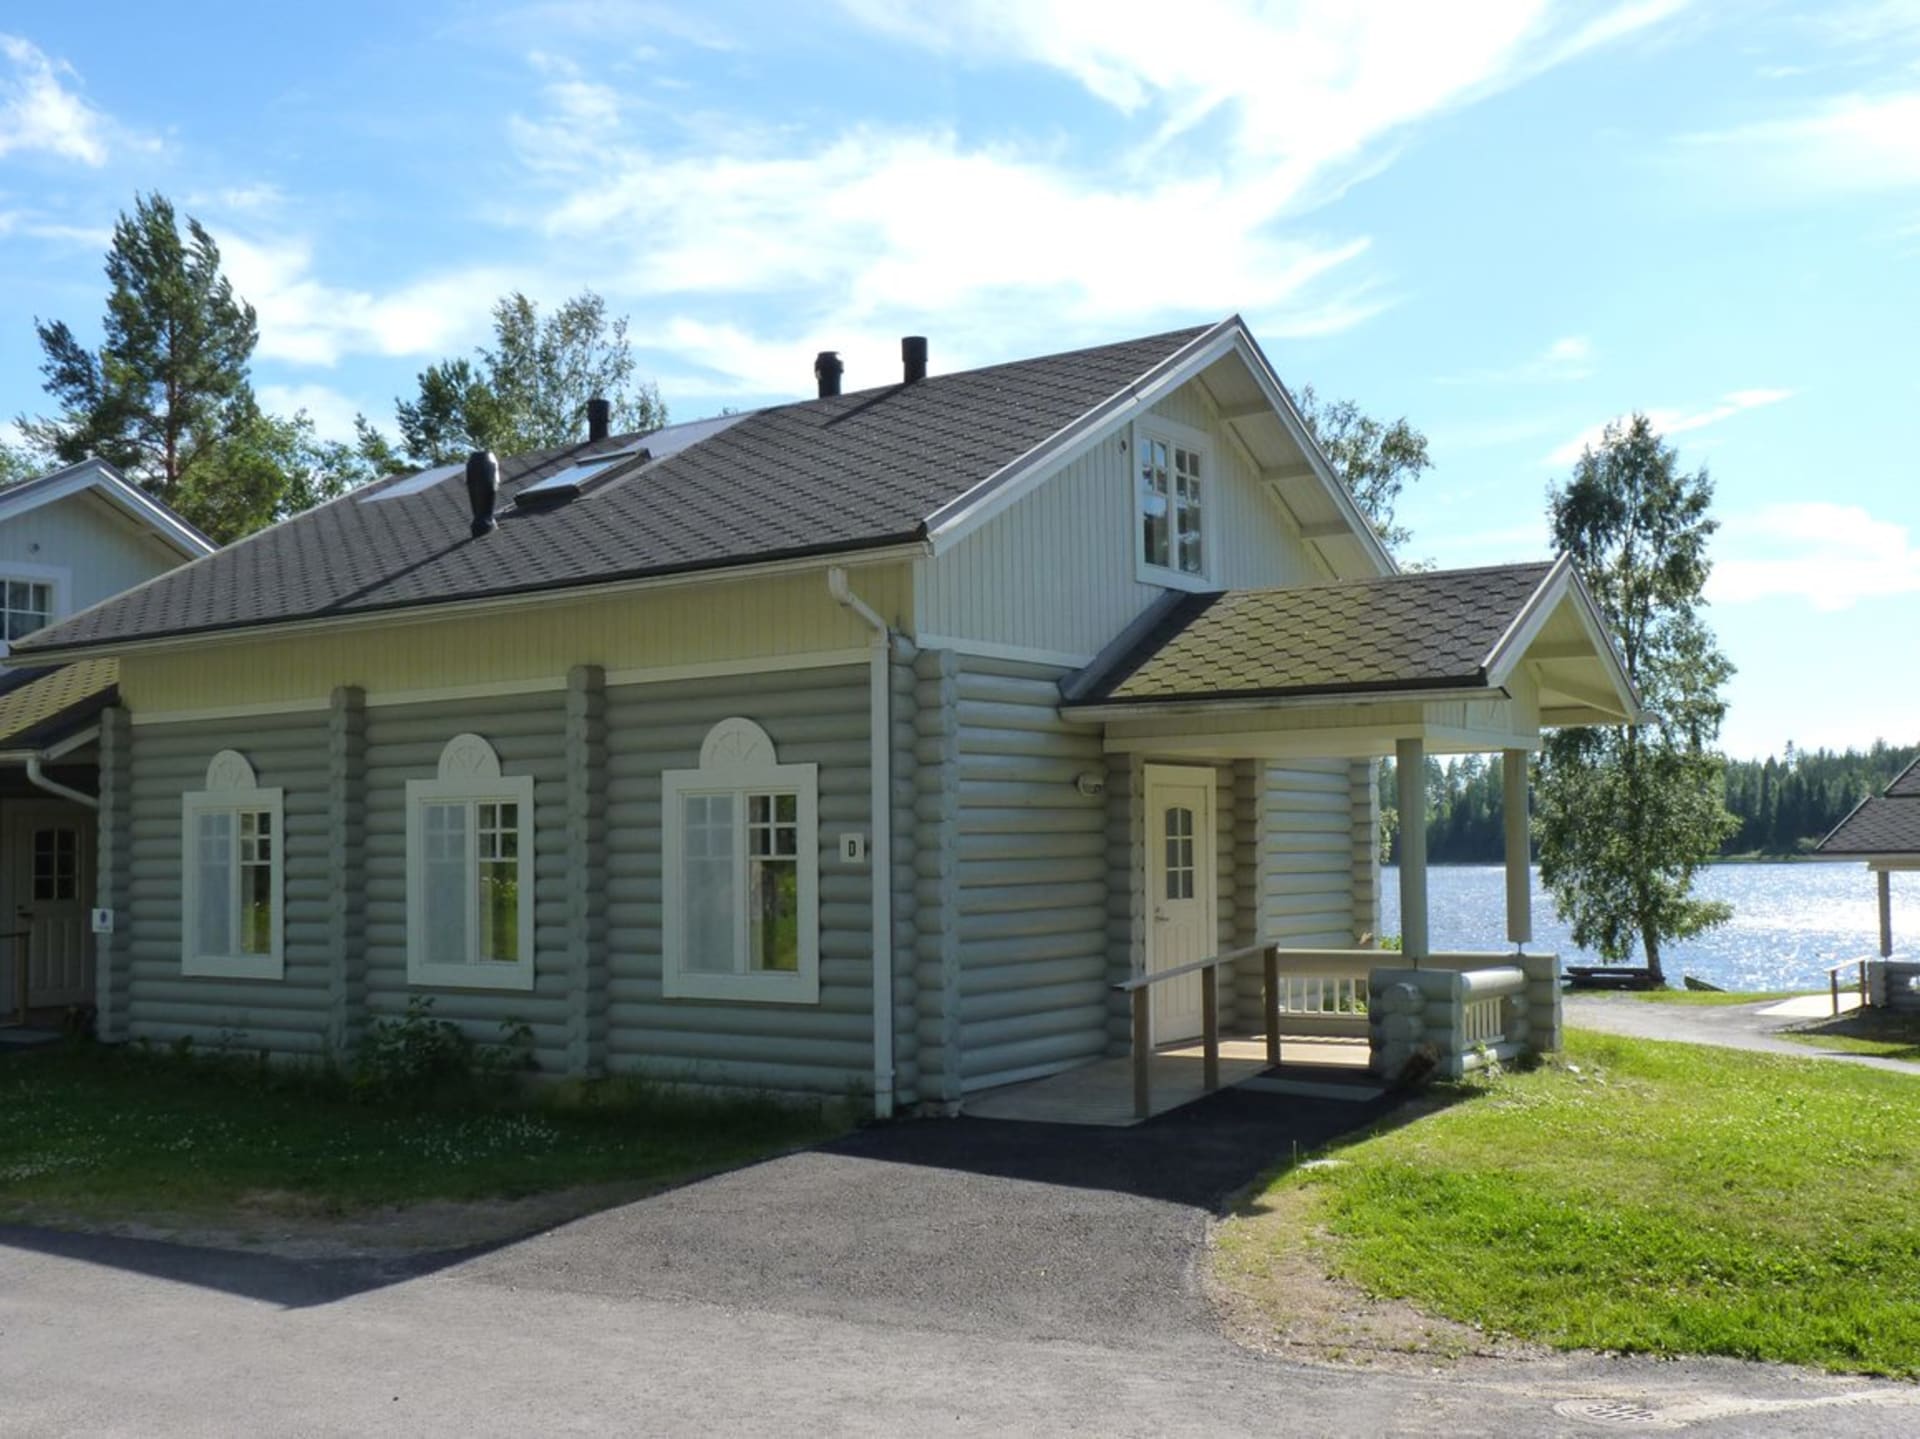 The log house apartments in Marttinen